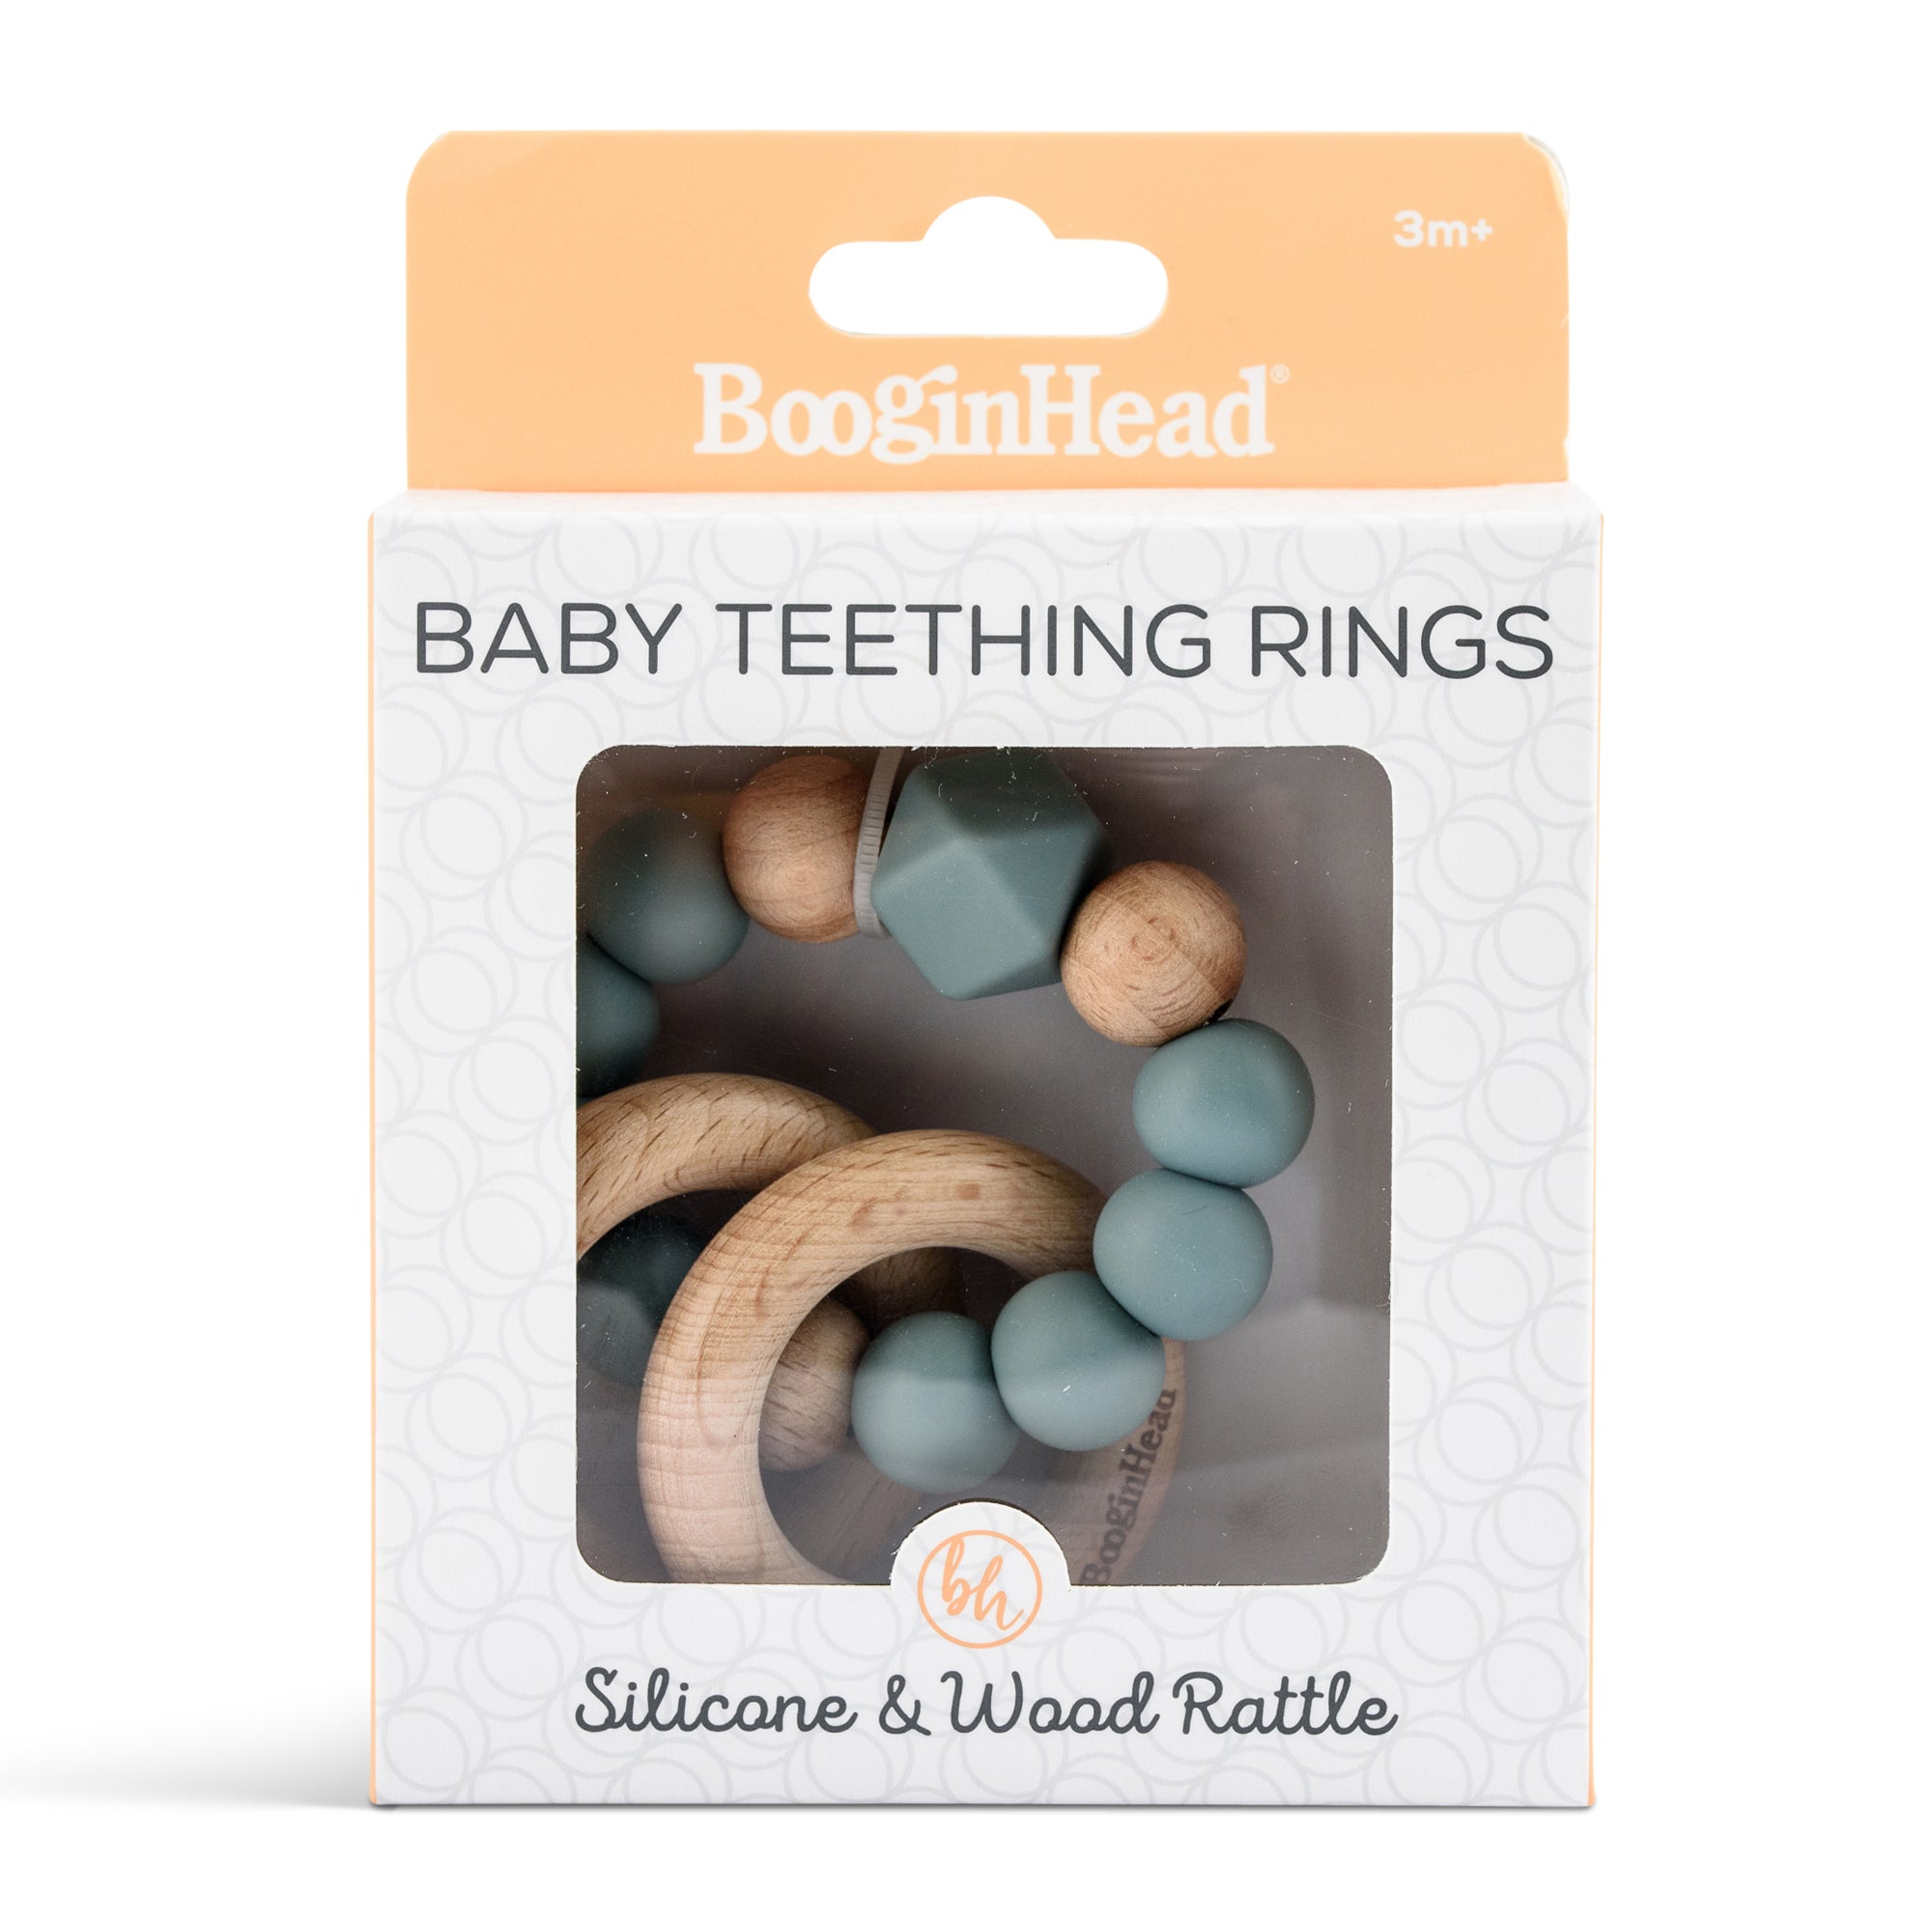 Booginghead Beaded Silicone & Wood Teether Rings